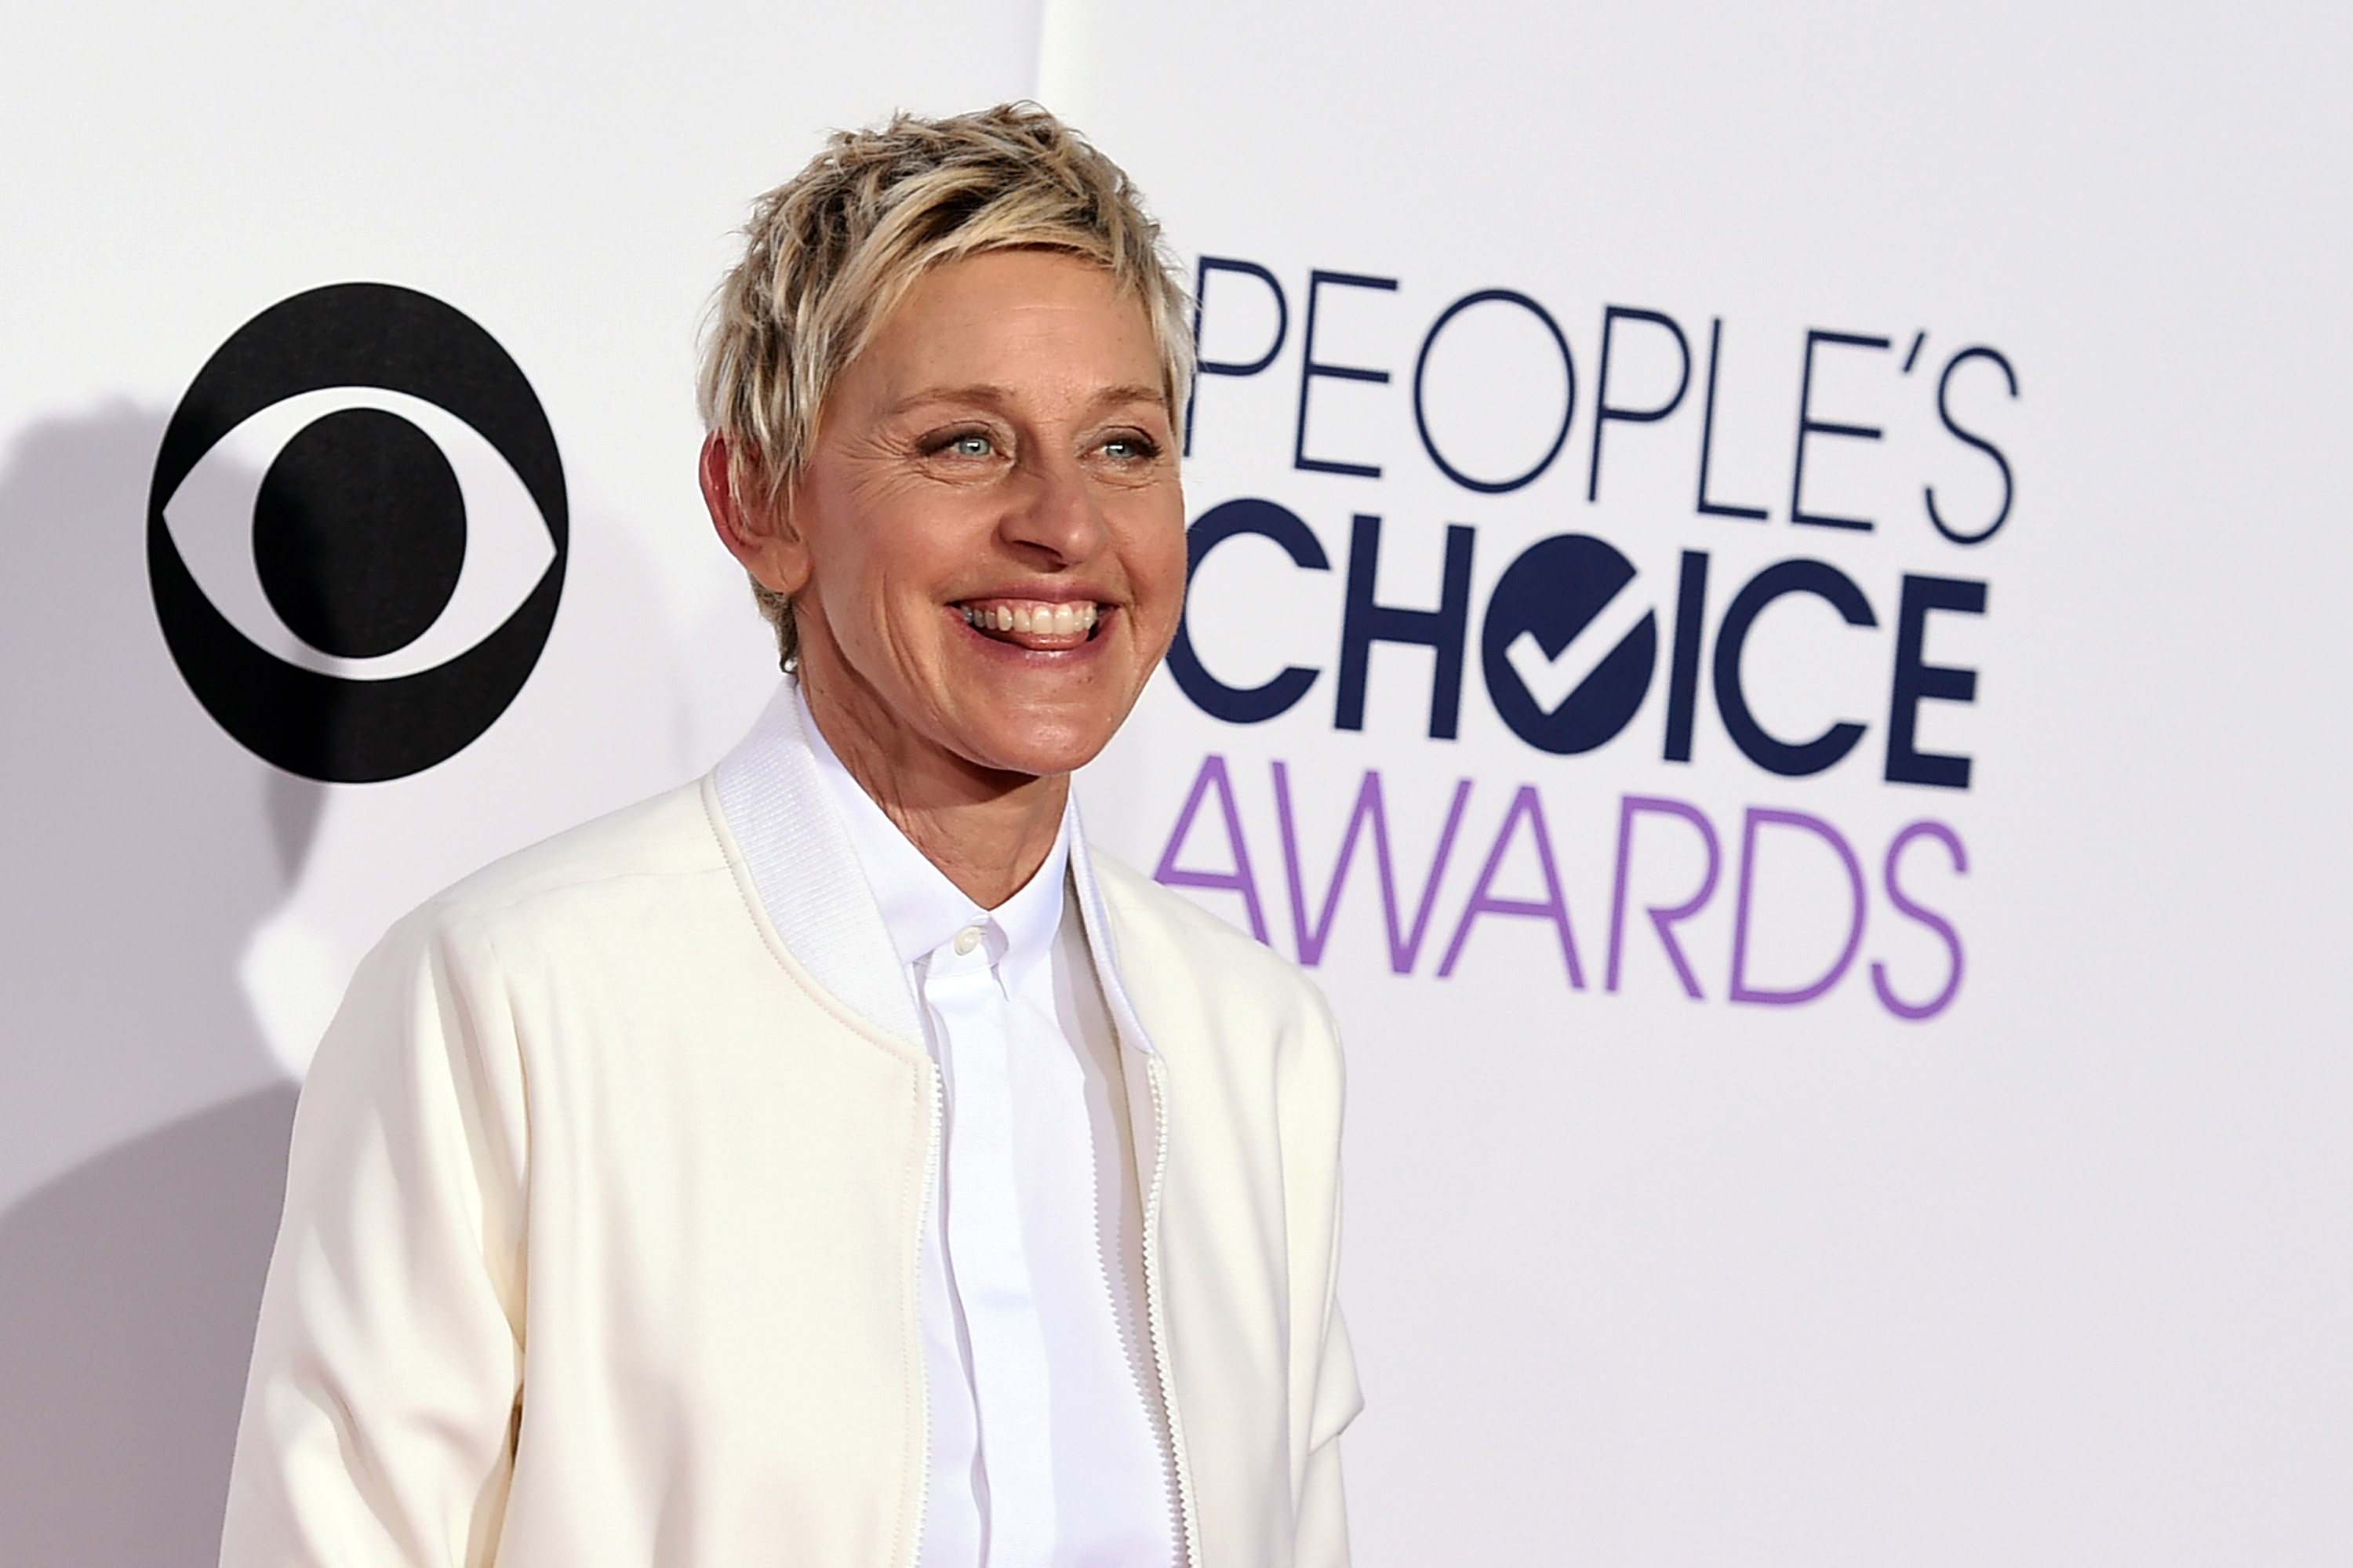 Ellen DeGeneres arrives at the People's Choice Awards at the Nokia Theatre on Wednesday, Jan. 7, 2015, in Los Angeles. (Photo by Jordan Strauss/Invision/AP)